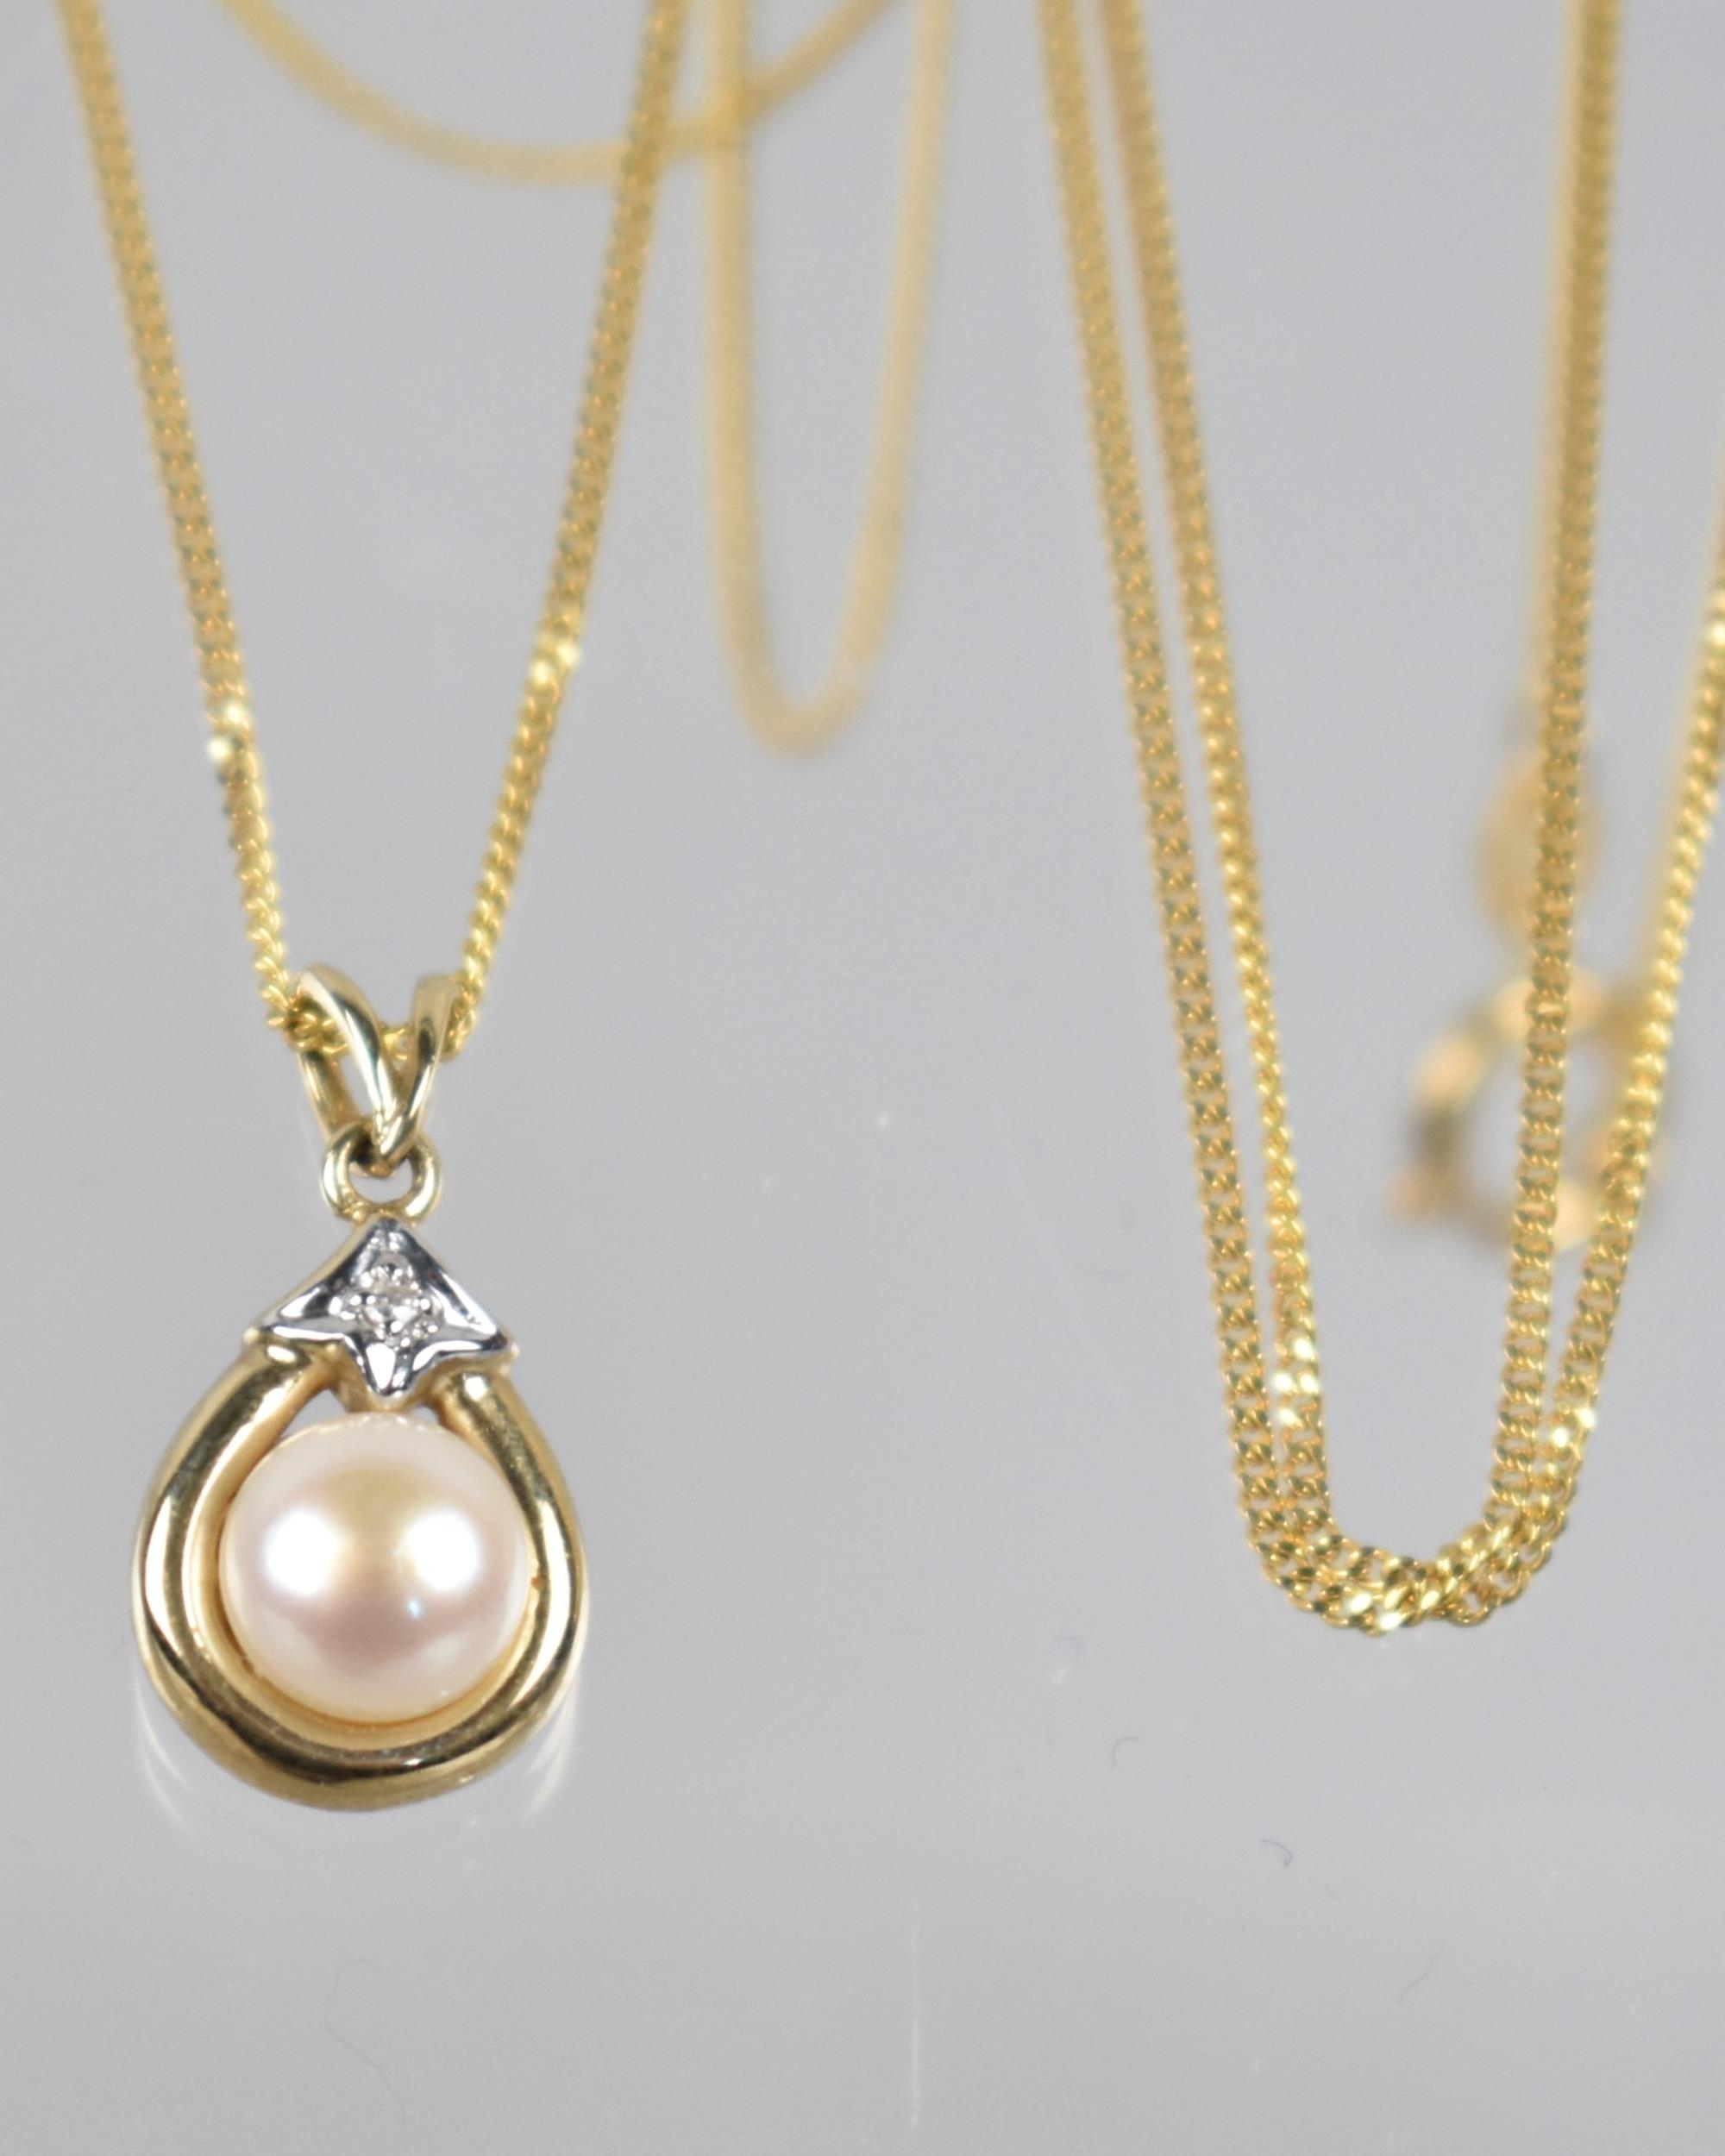 A 9ct Gold Pendant, Pearl with Bead Bright Set Diamond, on 9ct Gold Italian Flattened Curb Link - Image 3 of 3